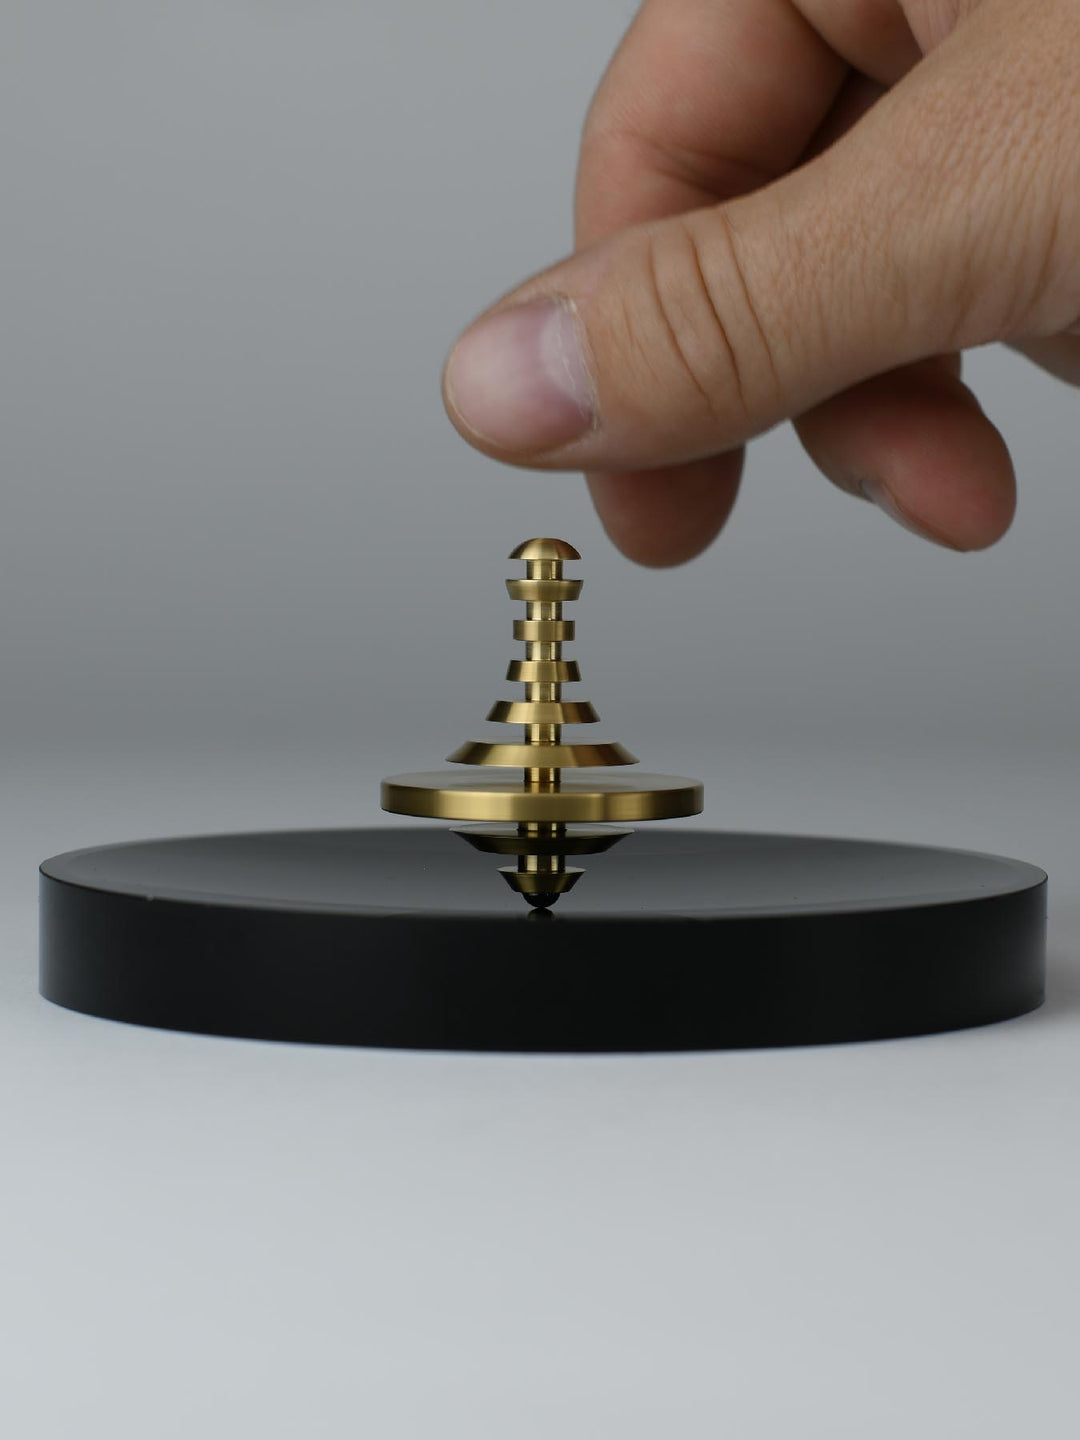 Mezmotoys™ Spinning Top (COMING SOON)